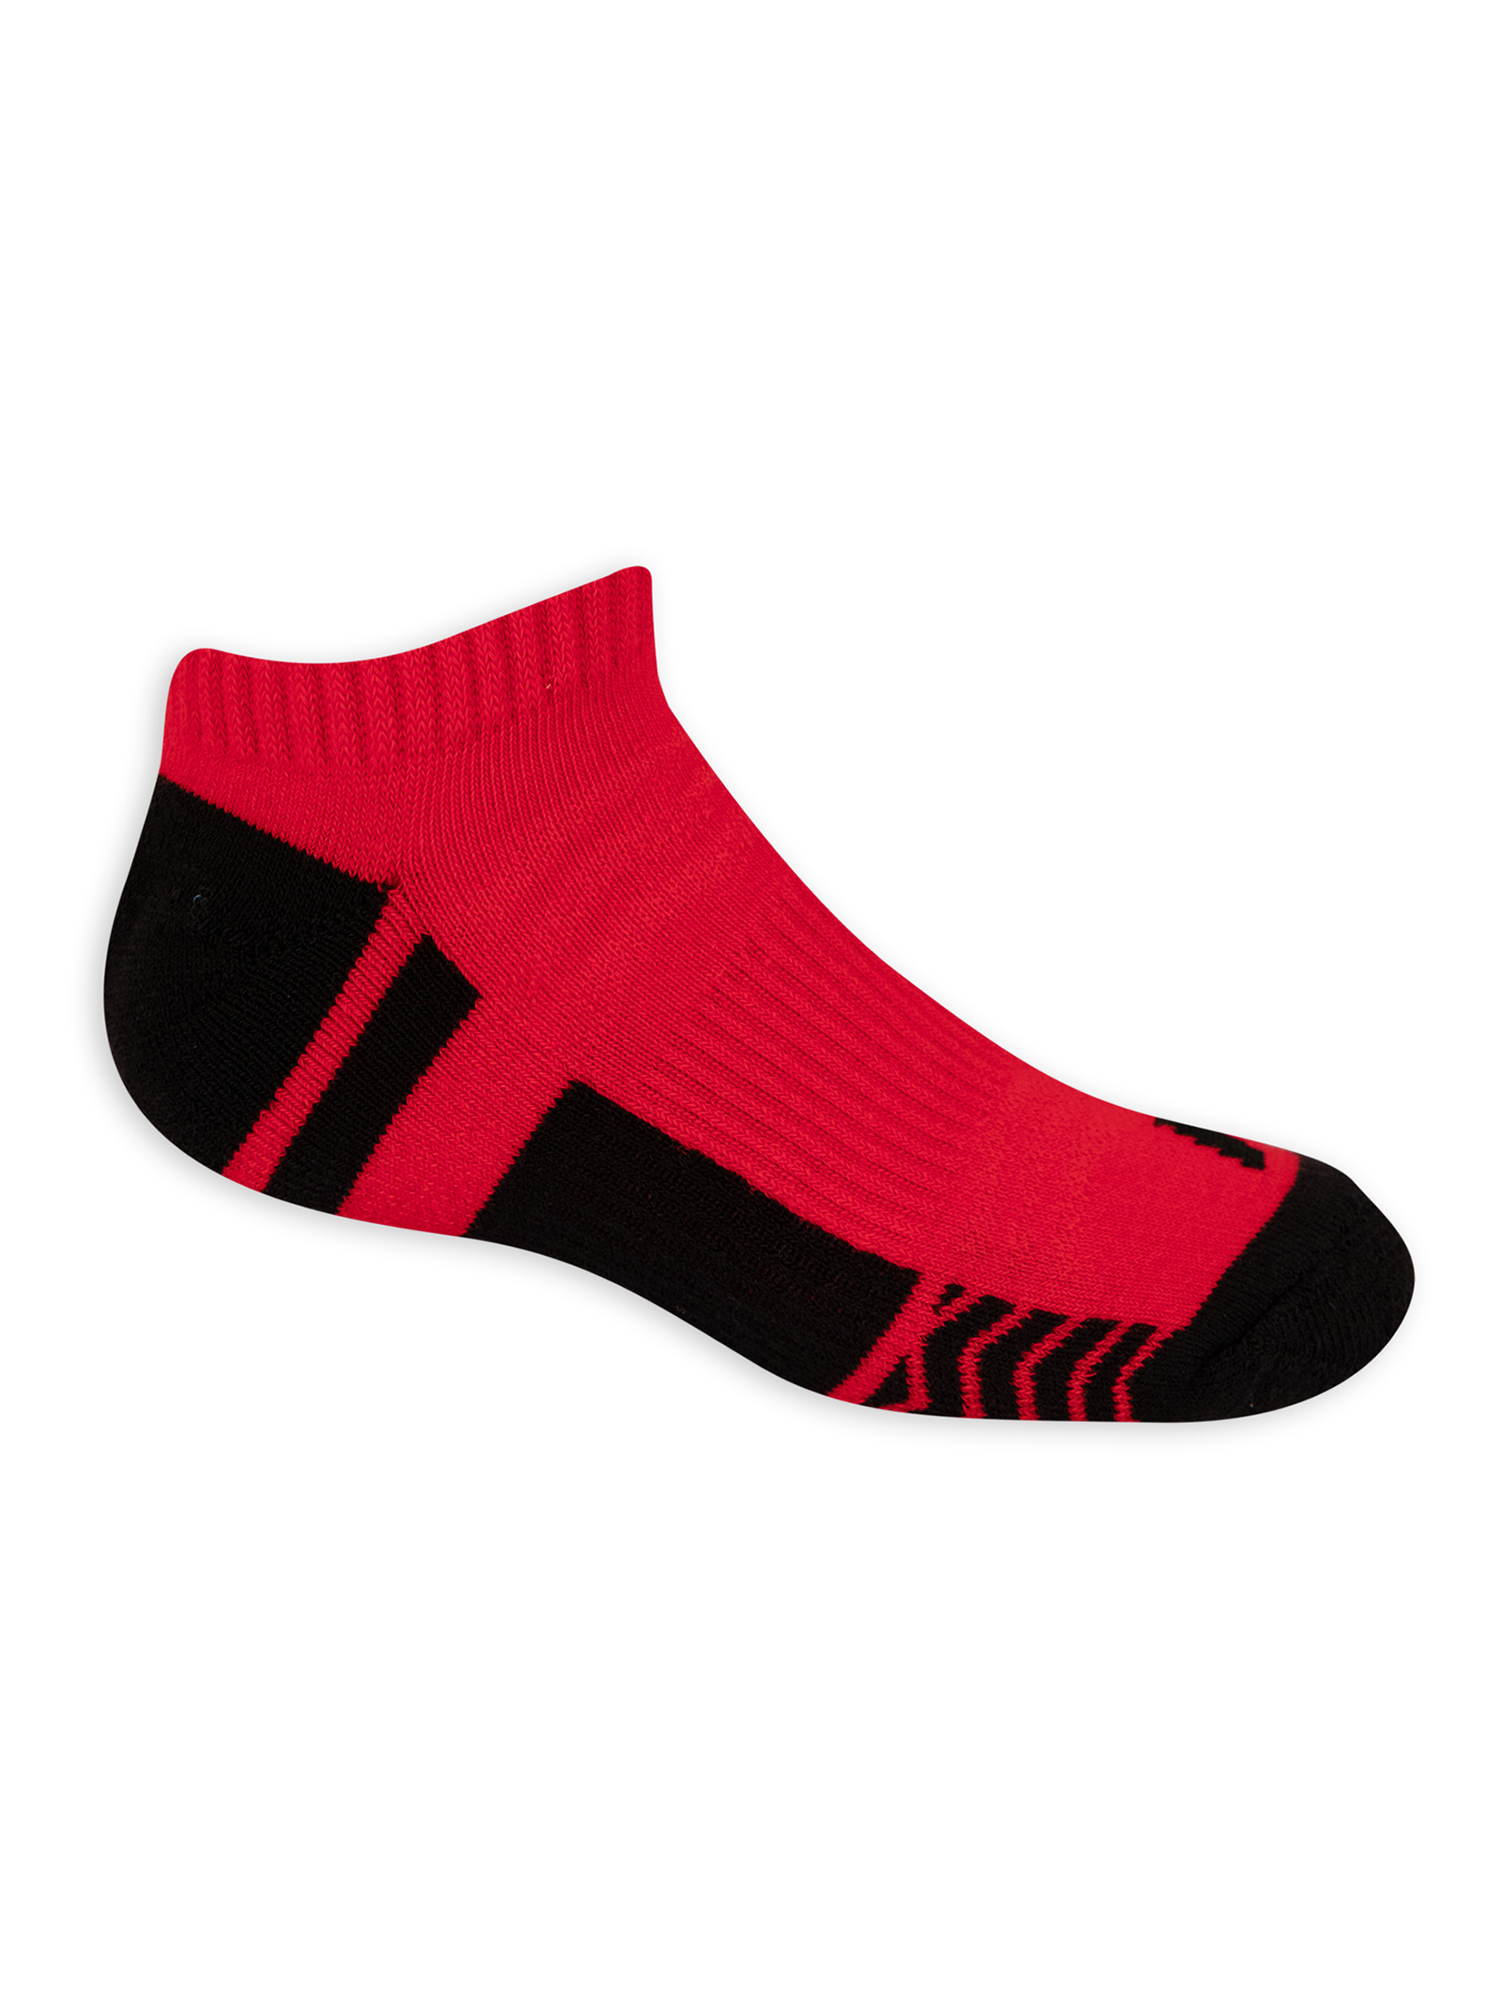 Russell Active Boys No Show Socks 6 Pack Socks - image 2 of 3